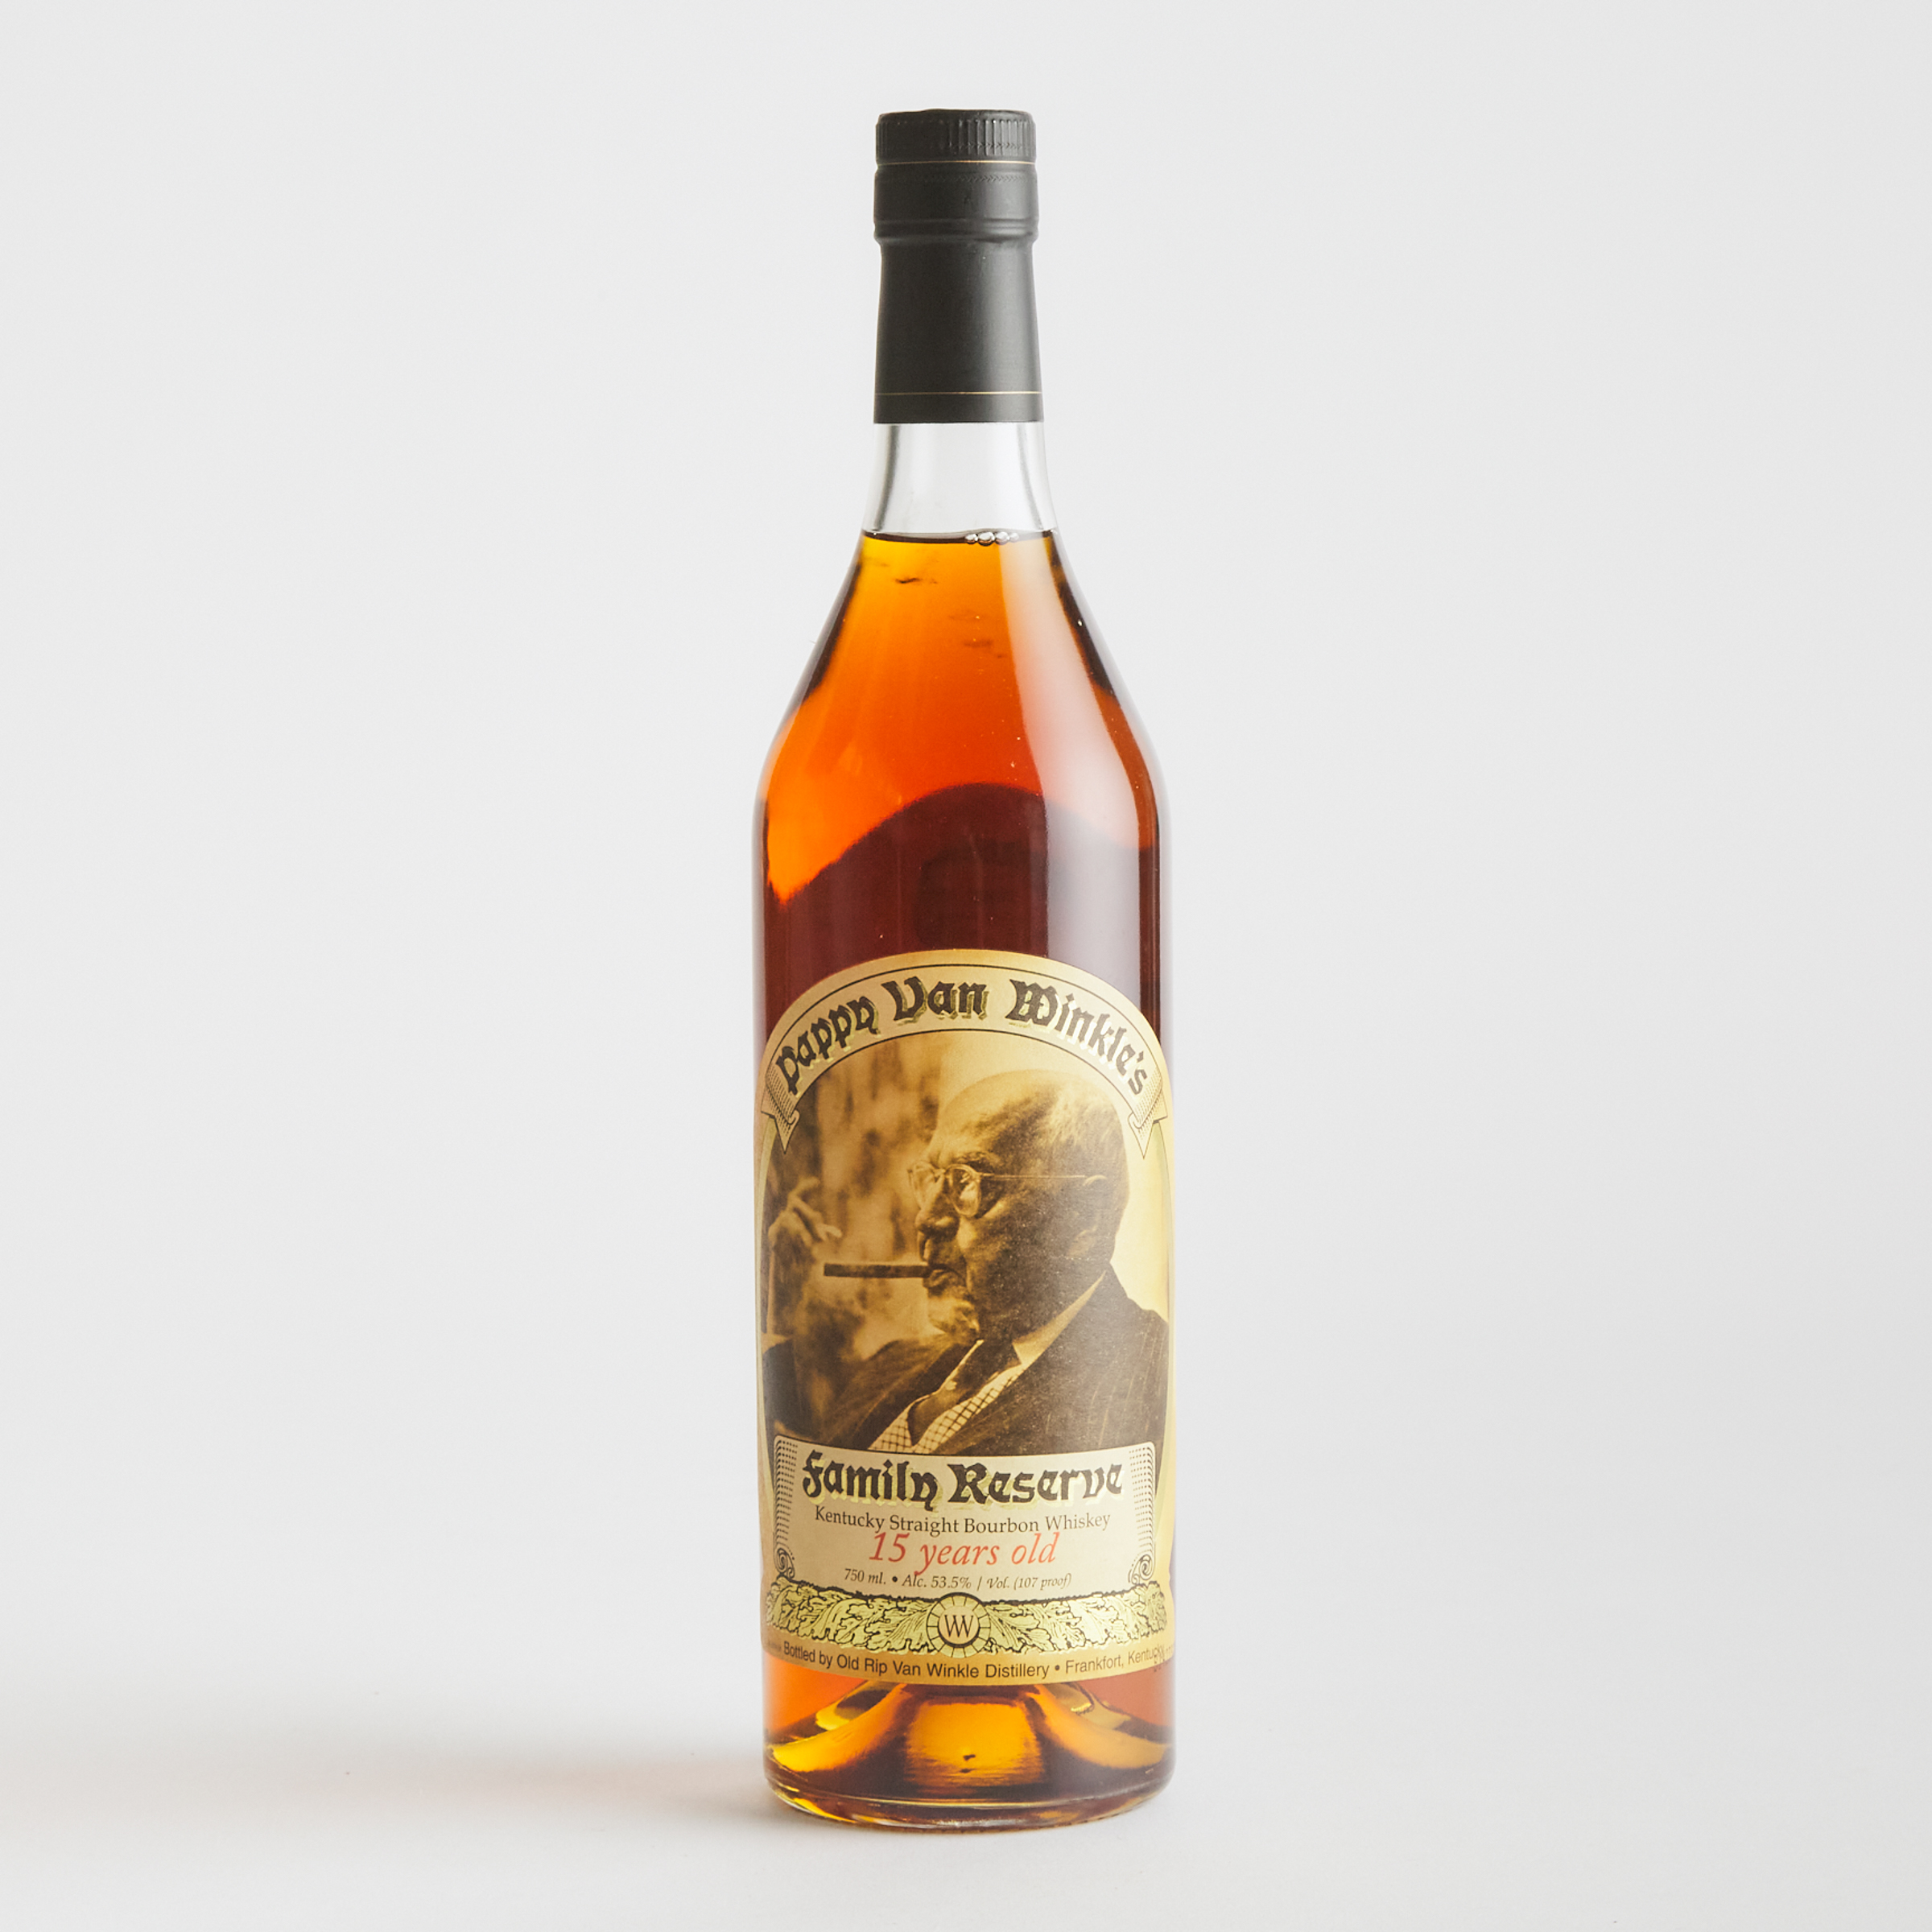 PAPPY VAN WINKLE FAMILY RESERVE KENTUCKY STRAIGHT BOURBON WHISKEY 15 YEARS (ONE 750 ML)